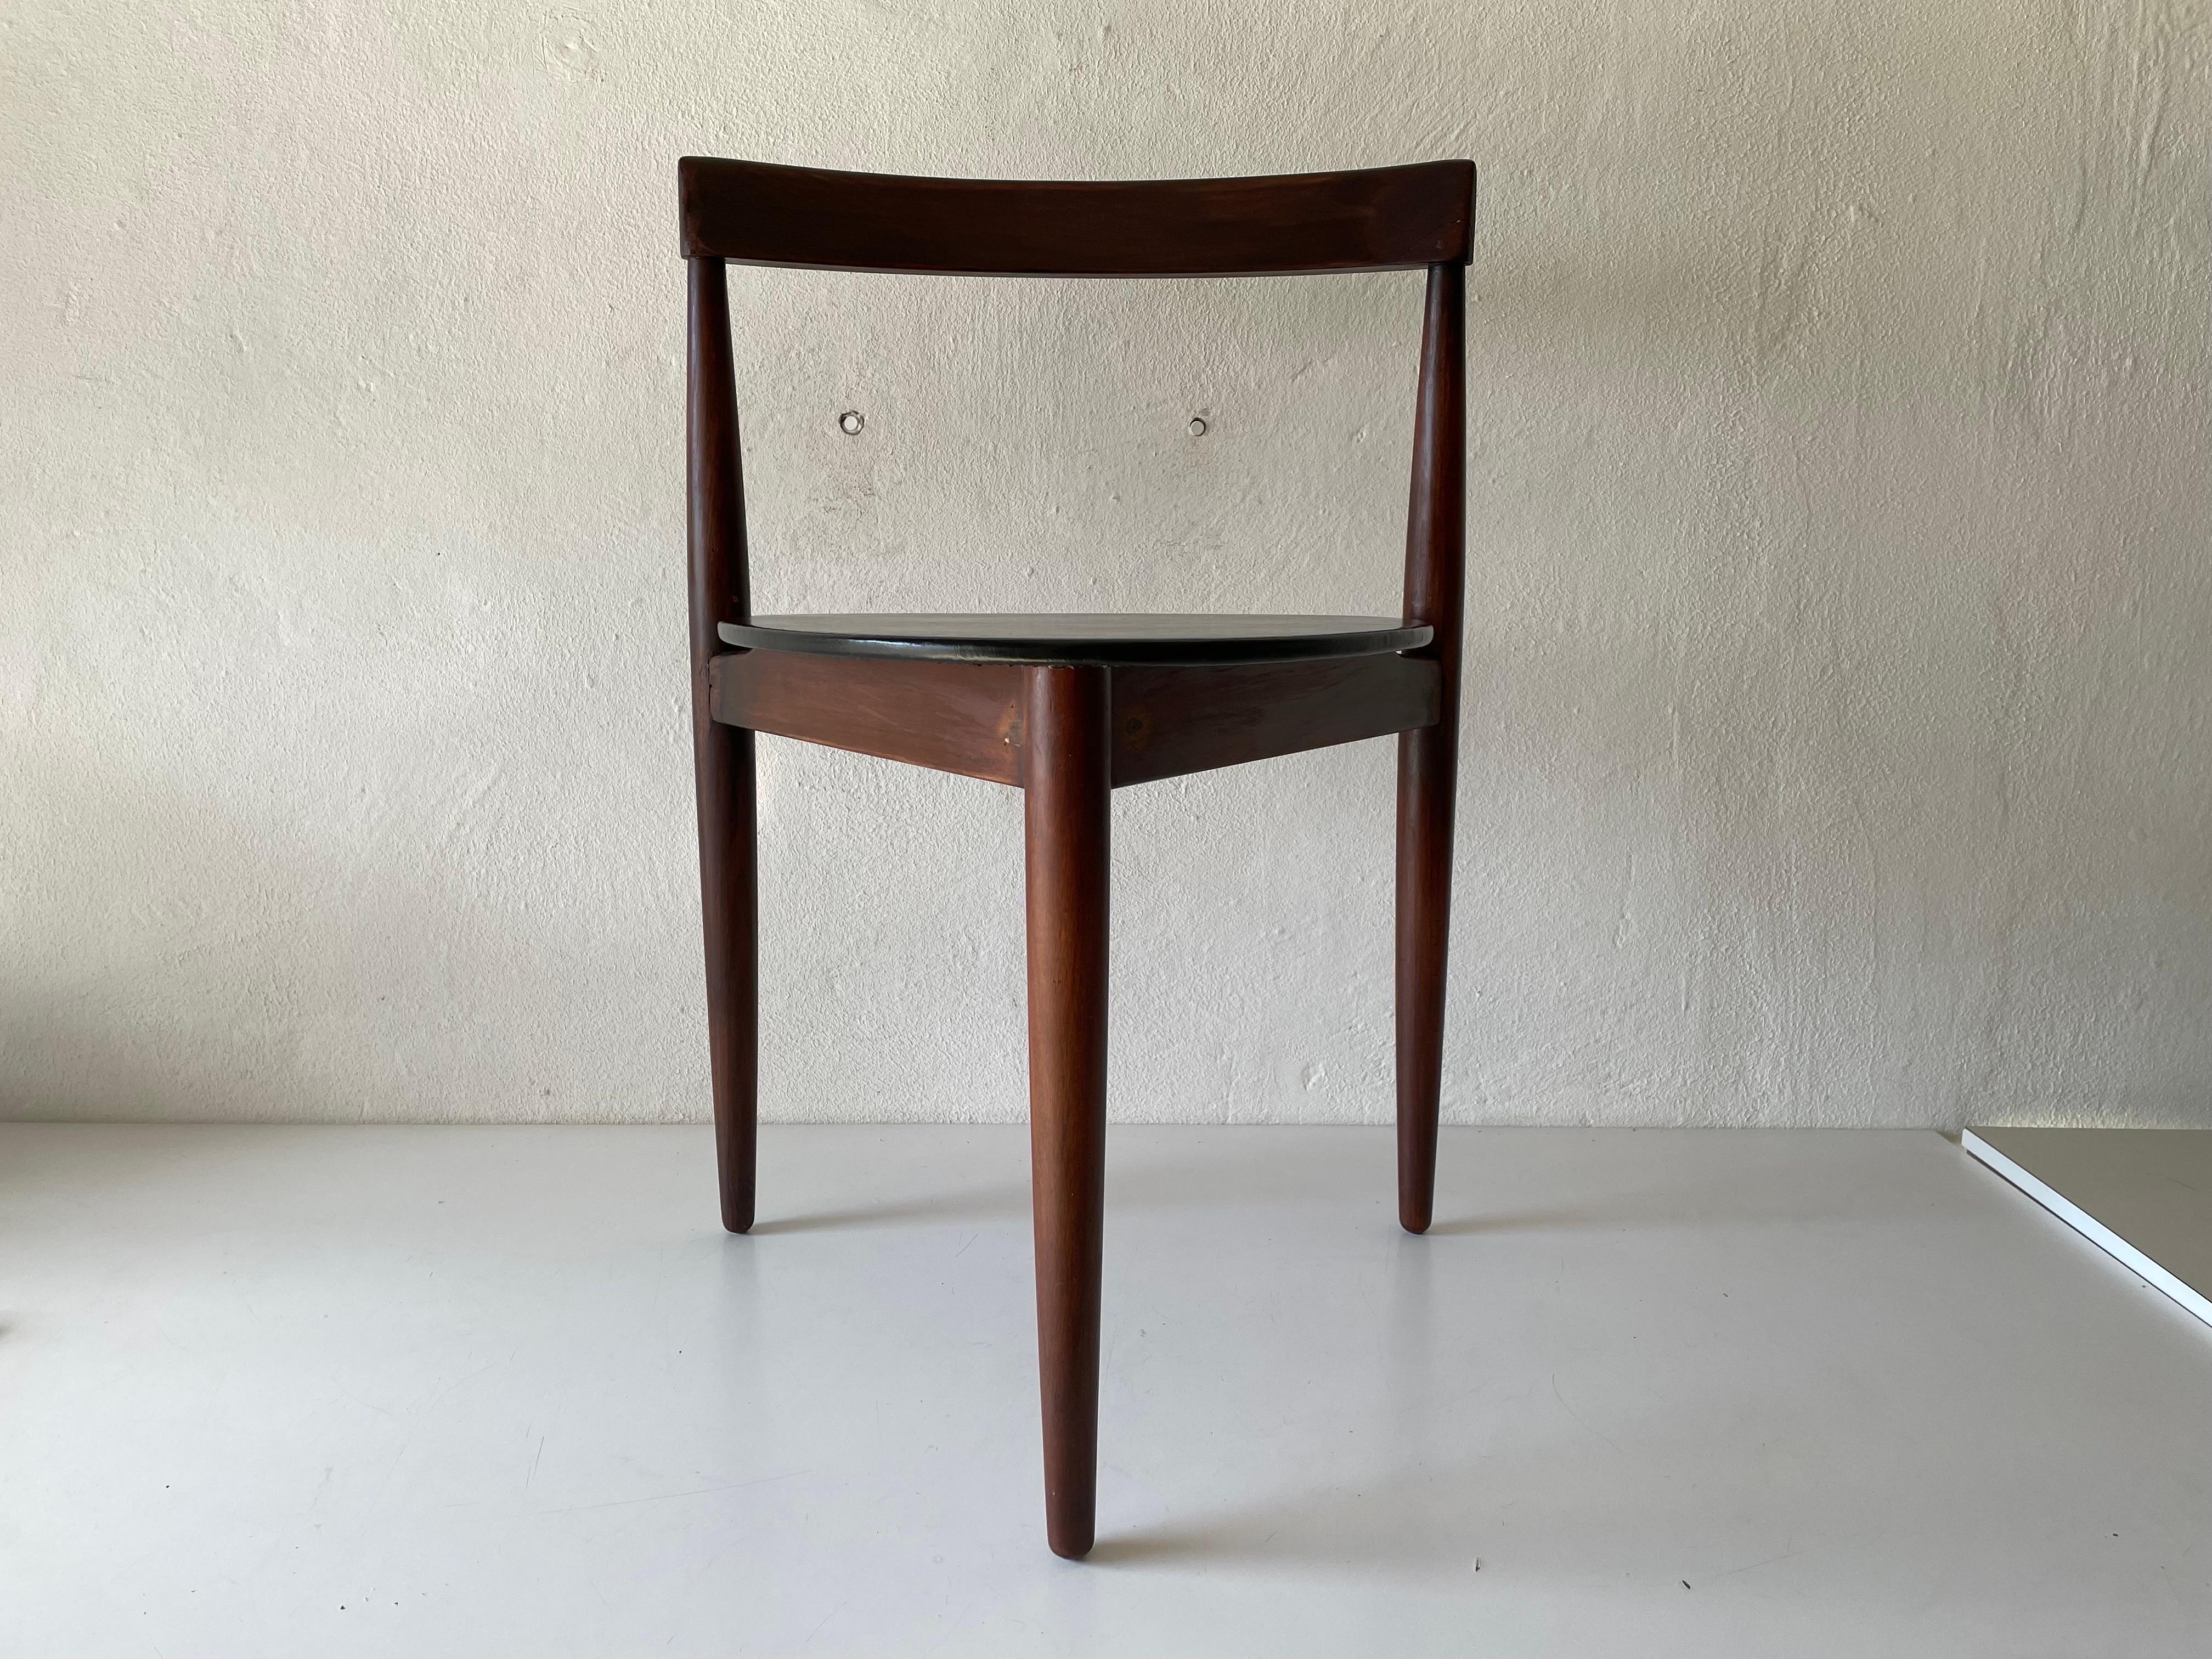 Danish Modern Teak Dining Chair by Hans Olsen for Frem Røjle, 1950s, Denmark

Measurements :

Height: 70 cm
Seating surface: 45 cm x 43 cm
Depth: 50 cm

Please do not hesitate to ask us if you have any questions.